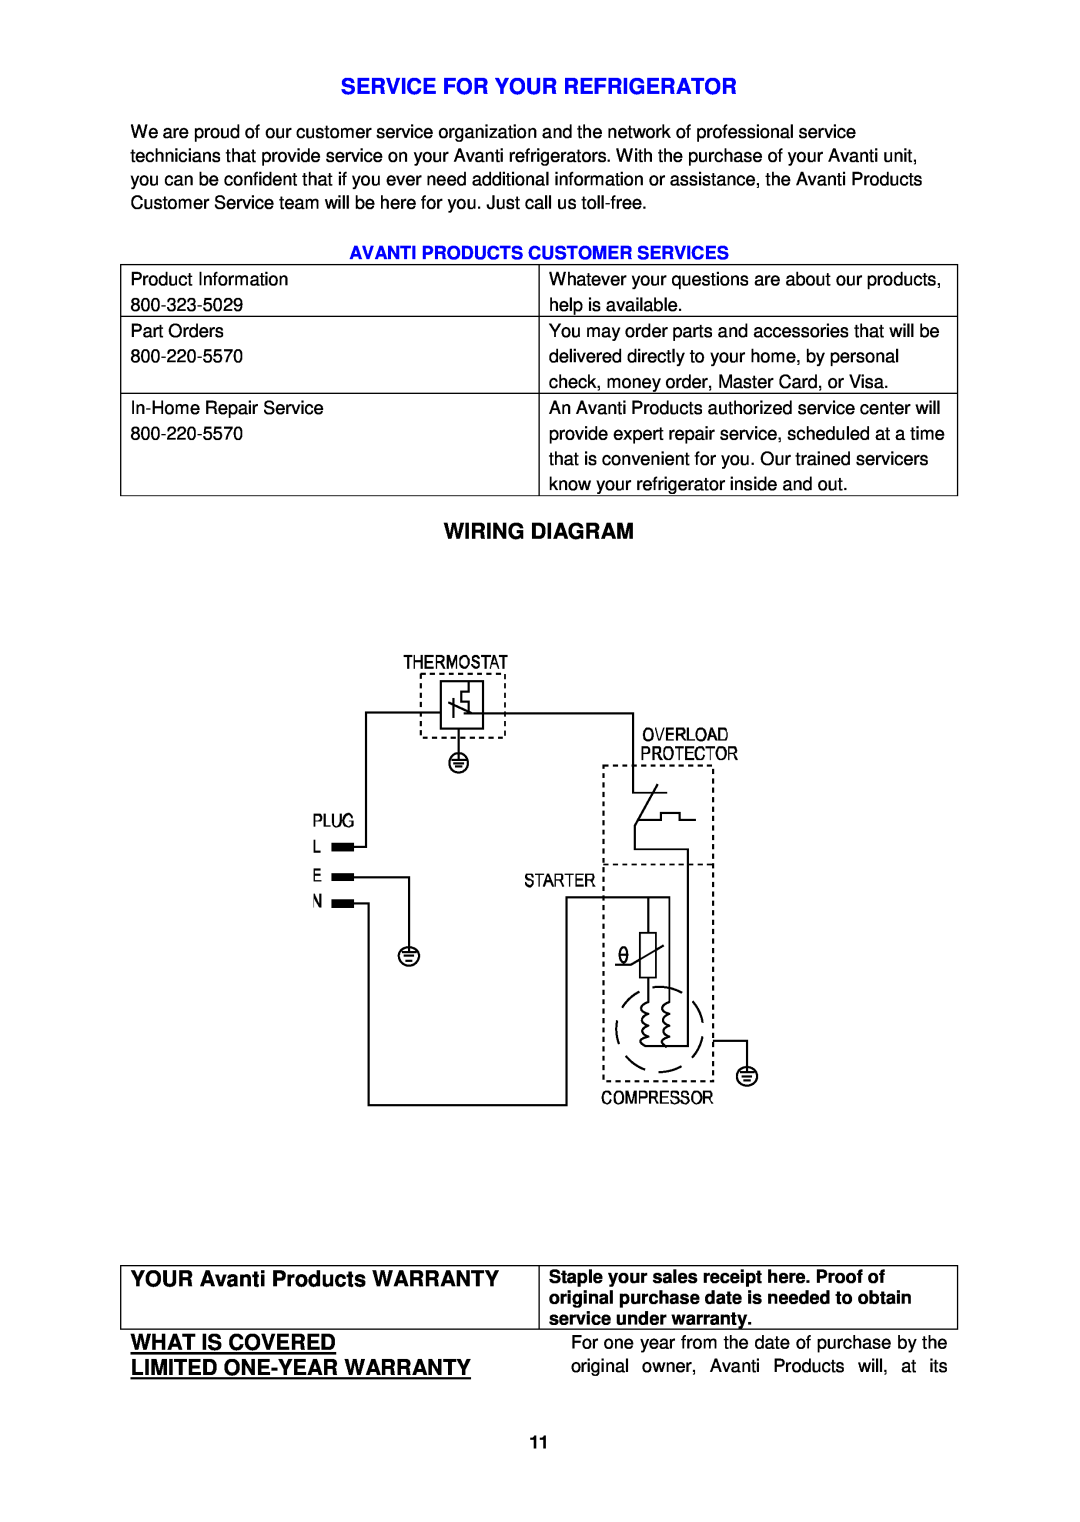 Avanti AR1733B Service For Your Refrigerator, Wiring Diagram, YOUR Avanti Products WARRANTY, What Is Covered 